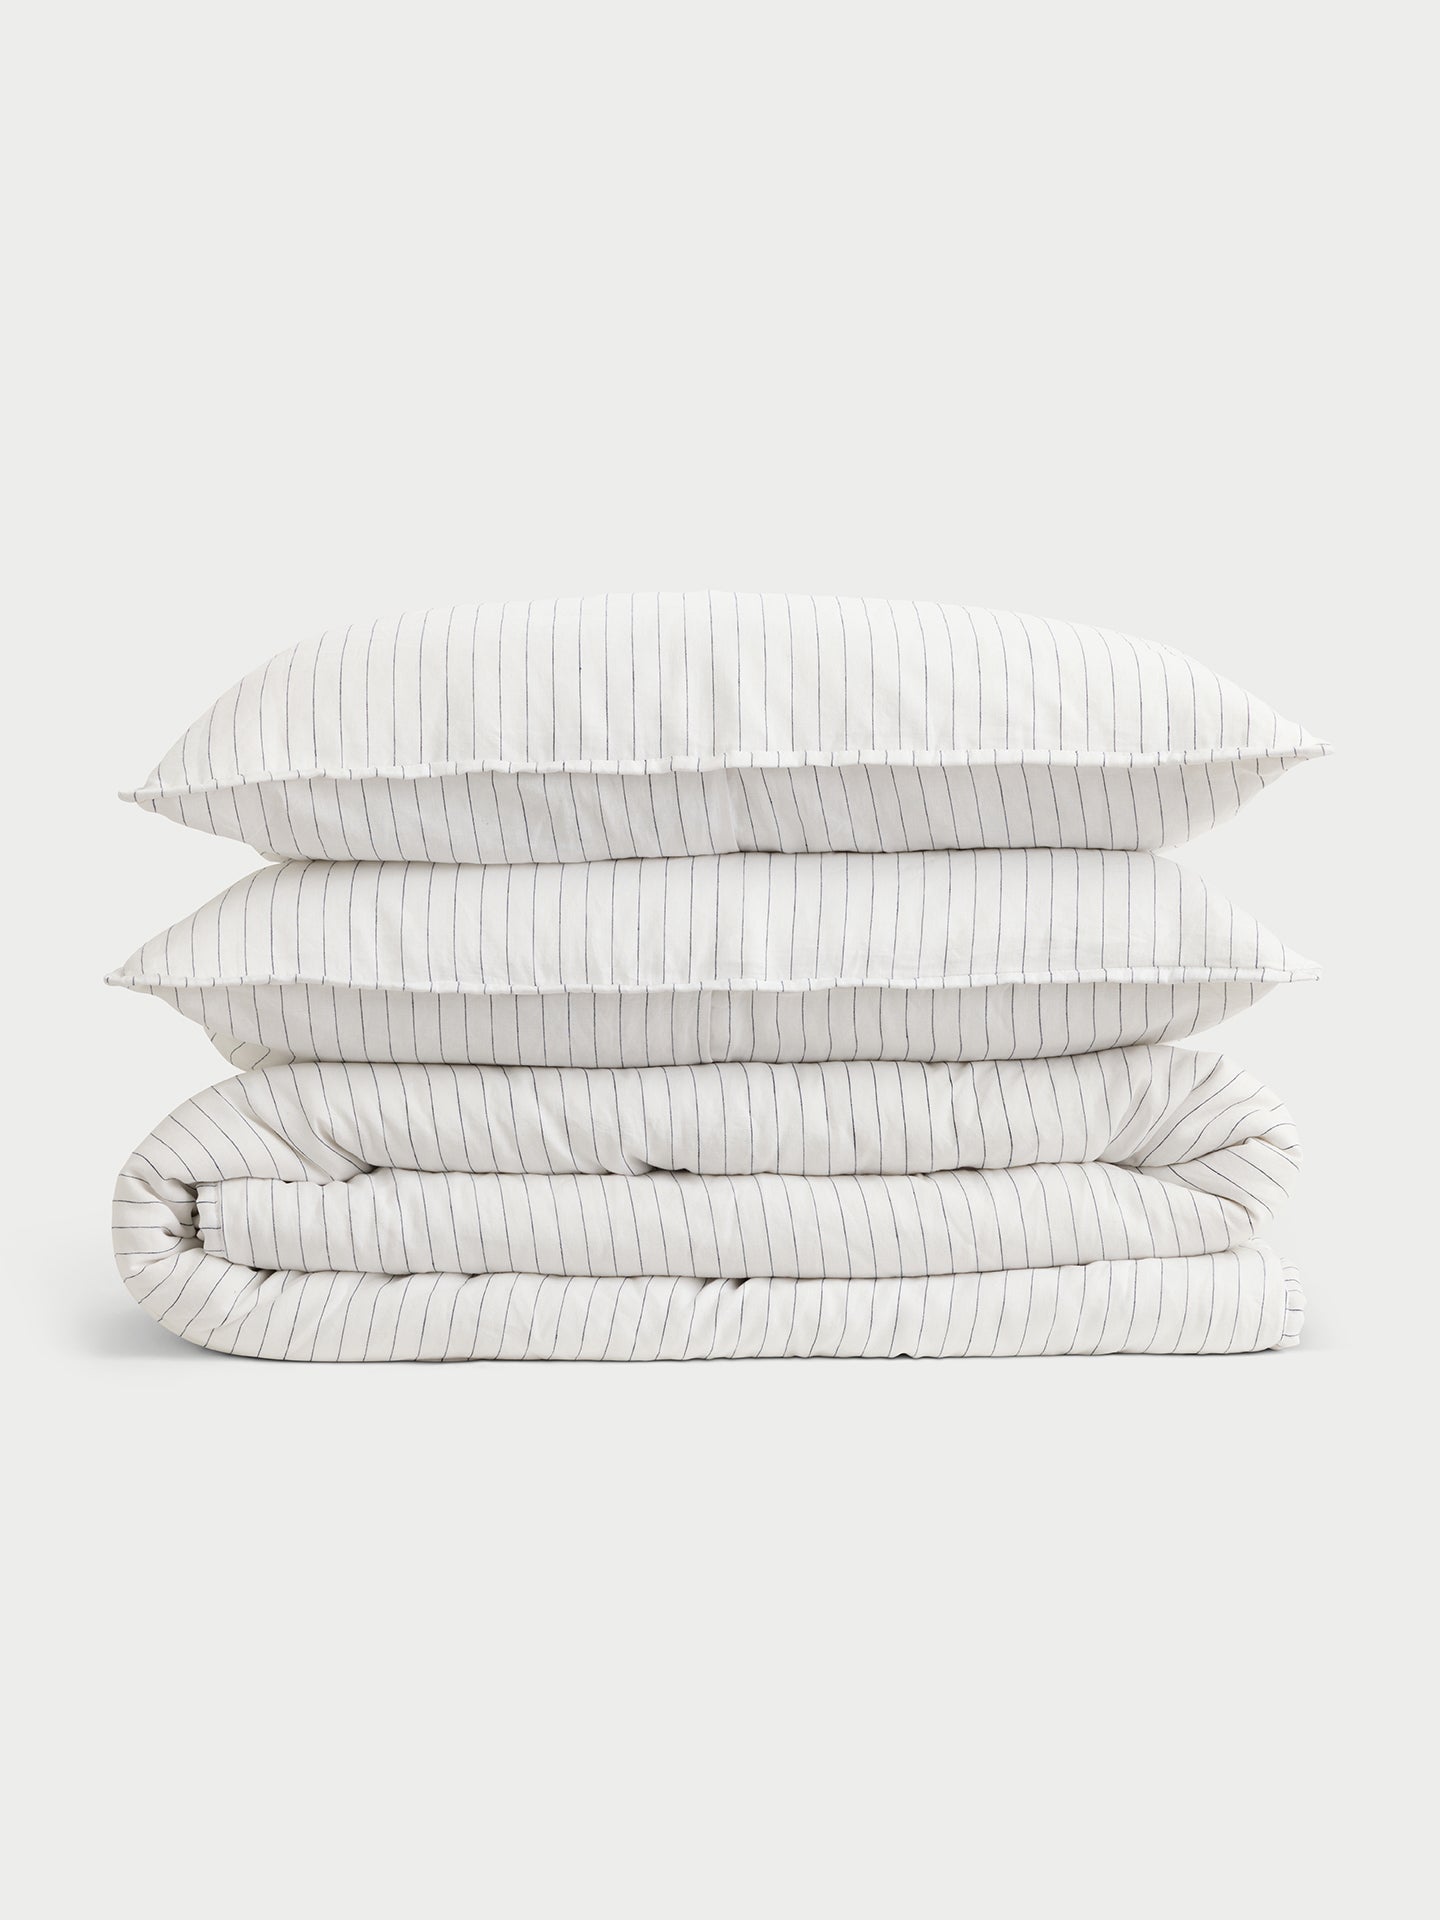 Charcoal pencil stripe quilt and shams folded with white background 